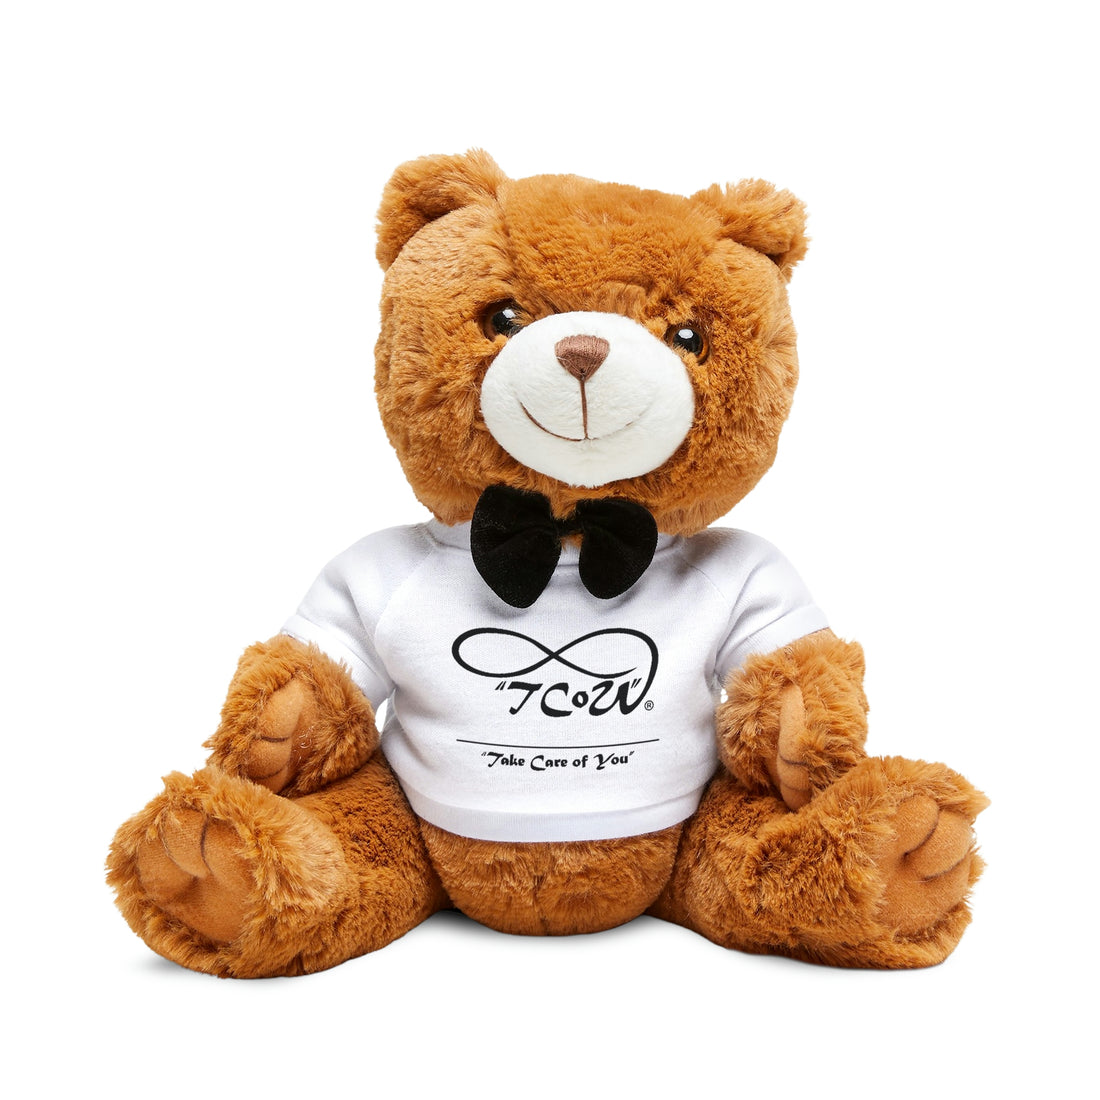 TCoU-Take Care of You -- Teddy Bear with T-Shirt